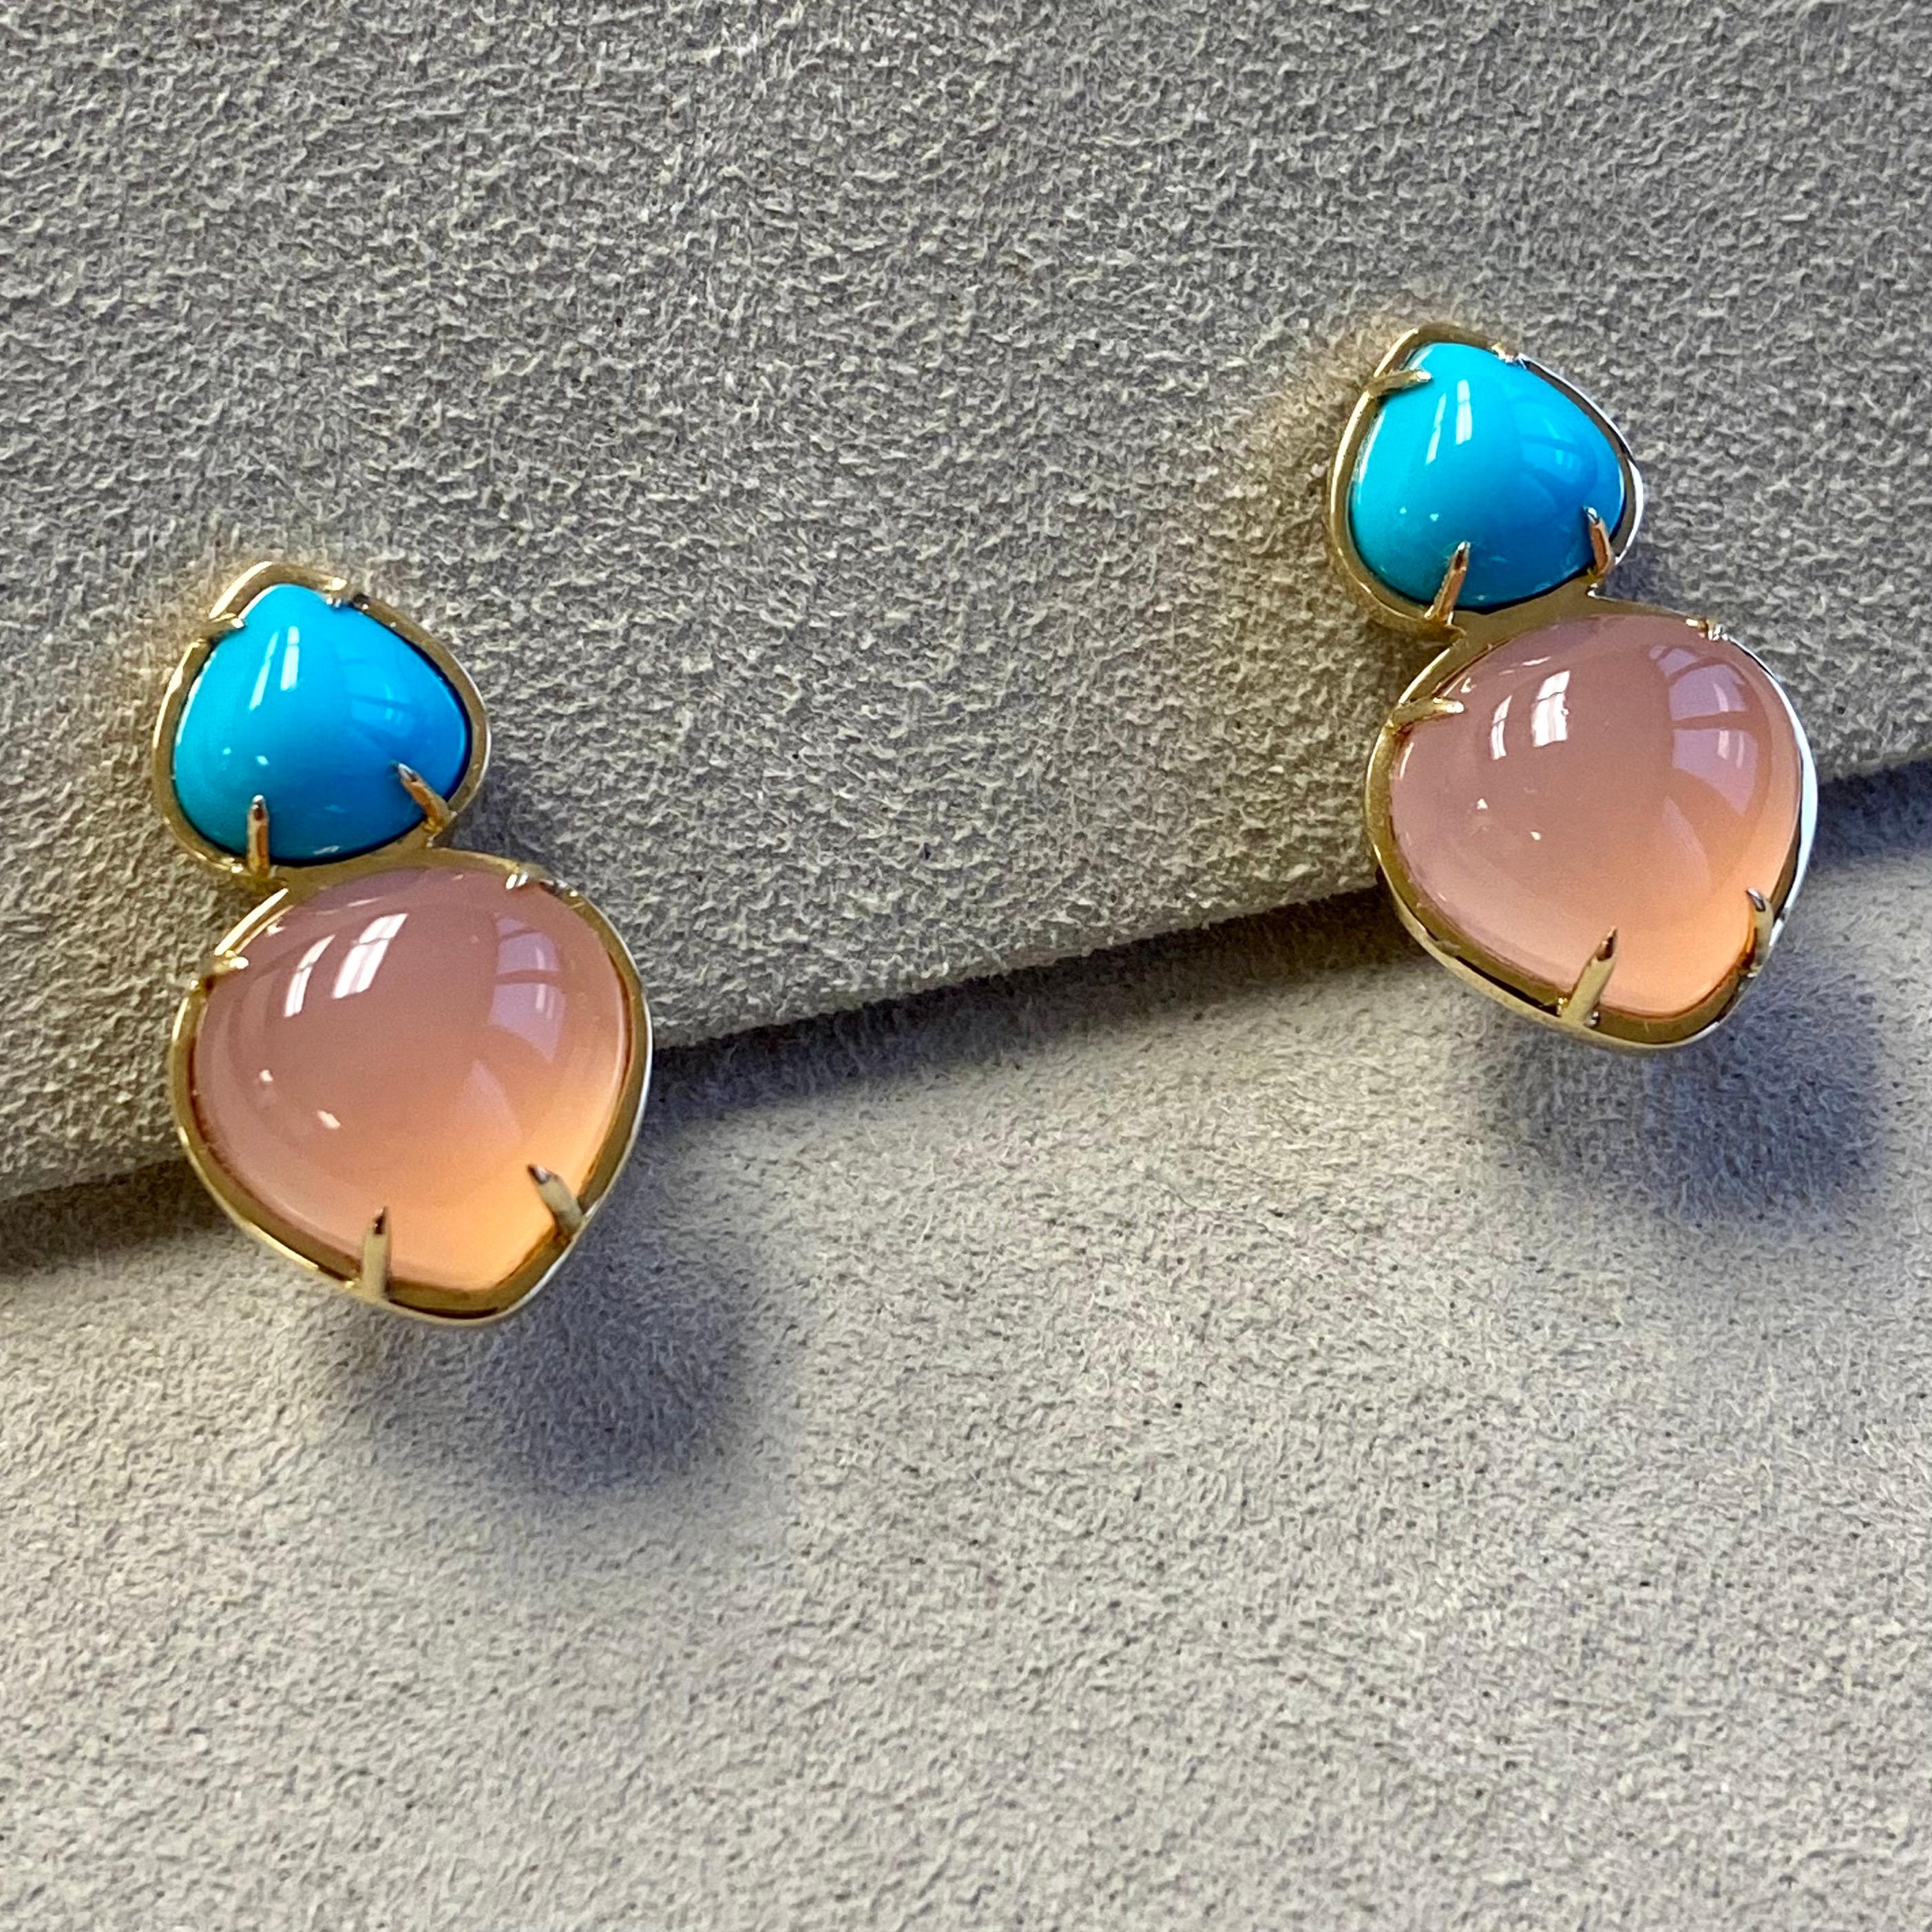 Created in 18 karat yellow gold
Rose Quartz 11.50 carats approx.
Sleeping Beauty Turquoise 3.5 carats approx.
Omega clip-backs & posts
Limited Edition


About the Designers

Drawing inspiration from little things, Dharmesh & Namrata Kothari have